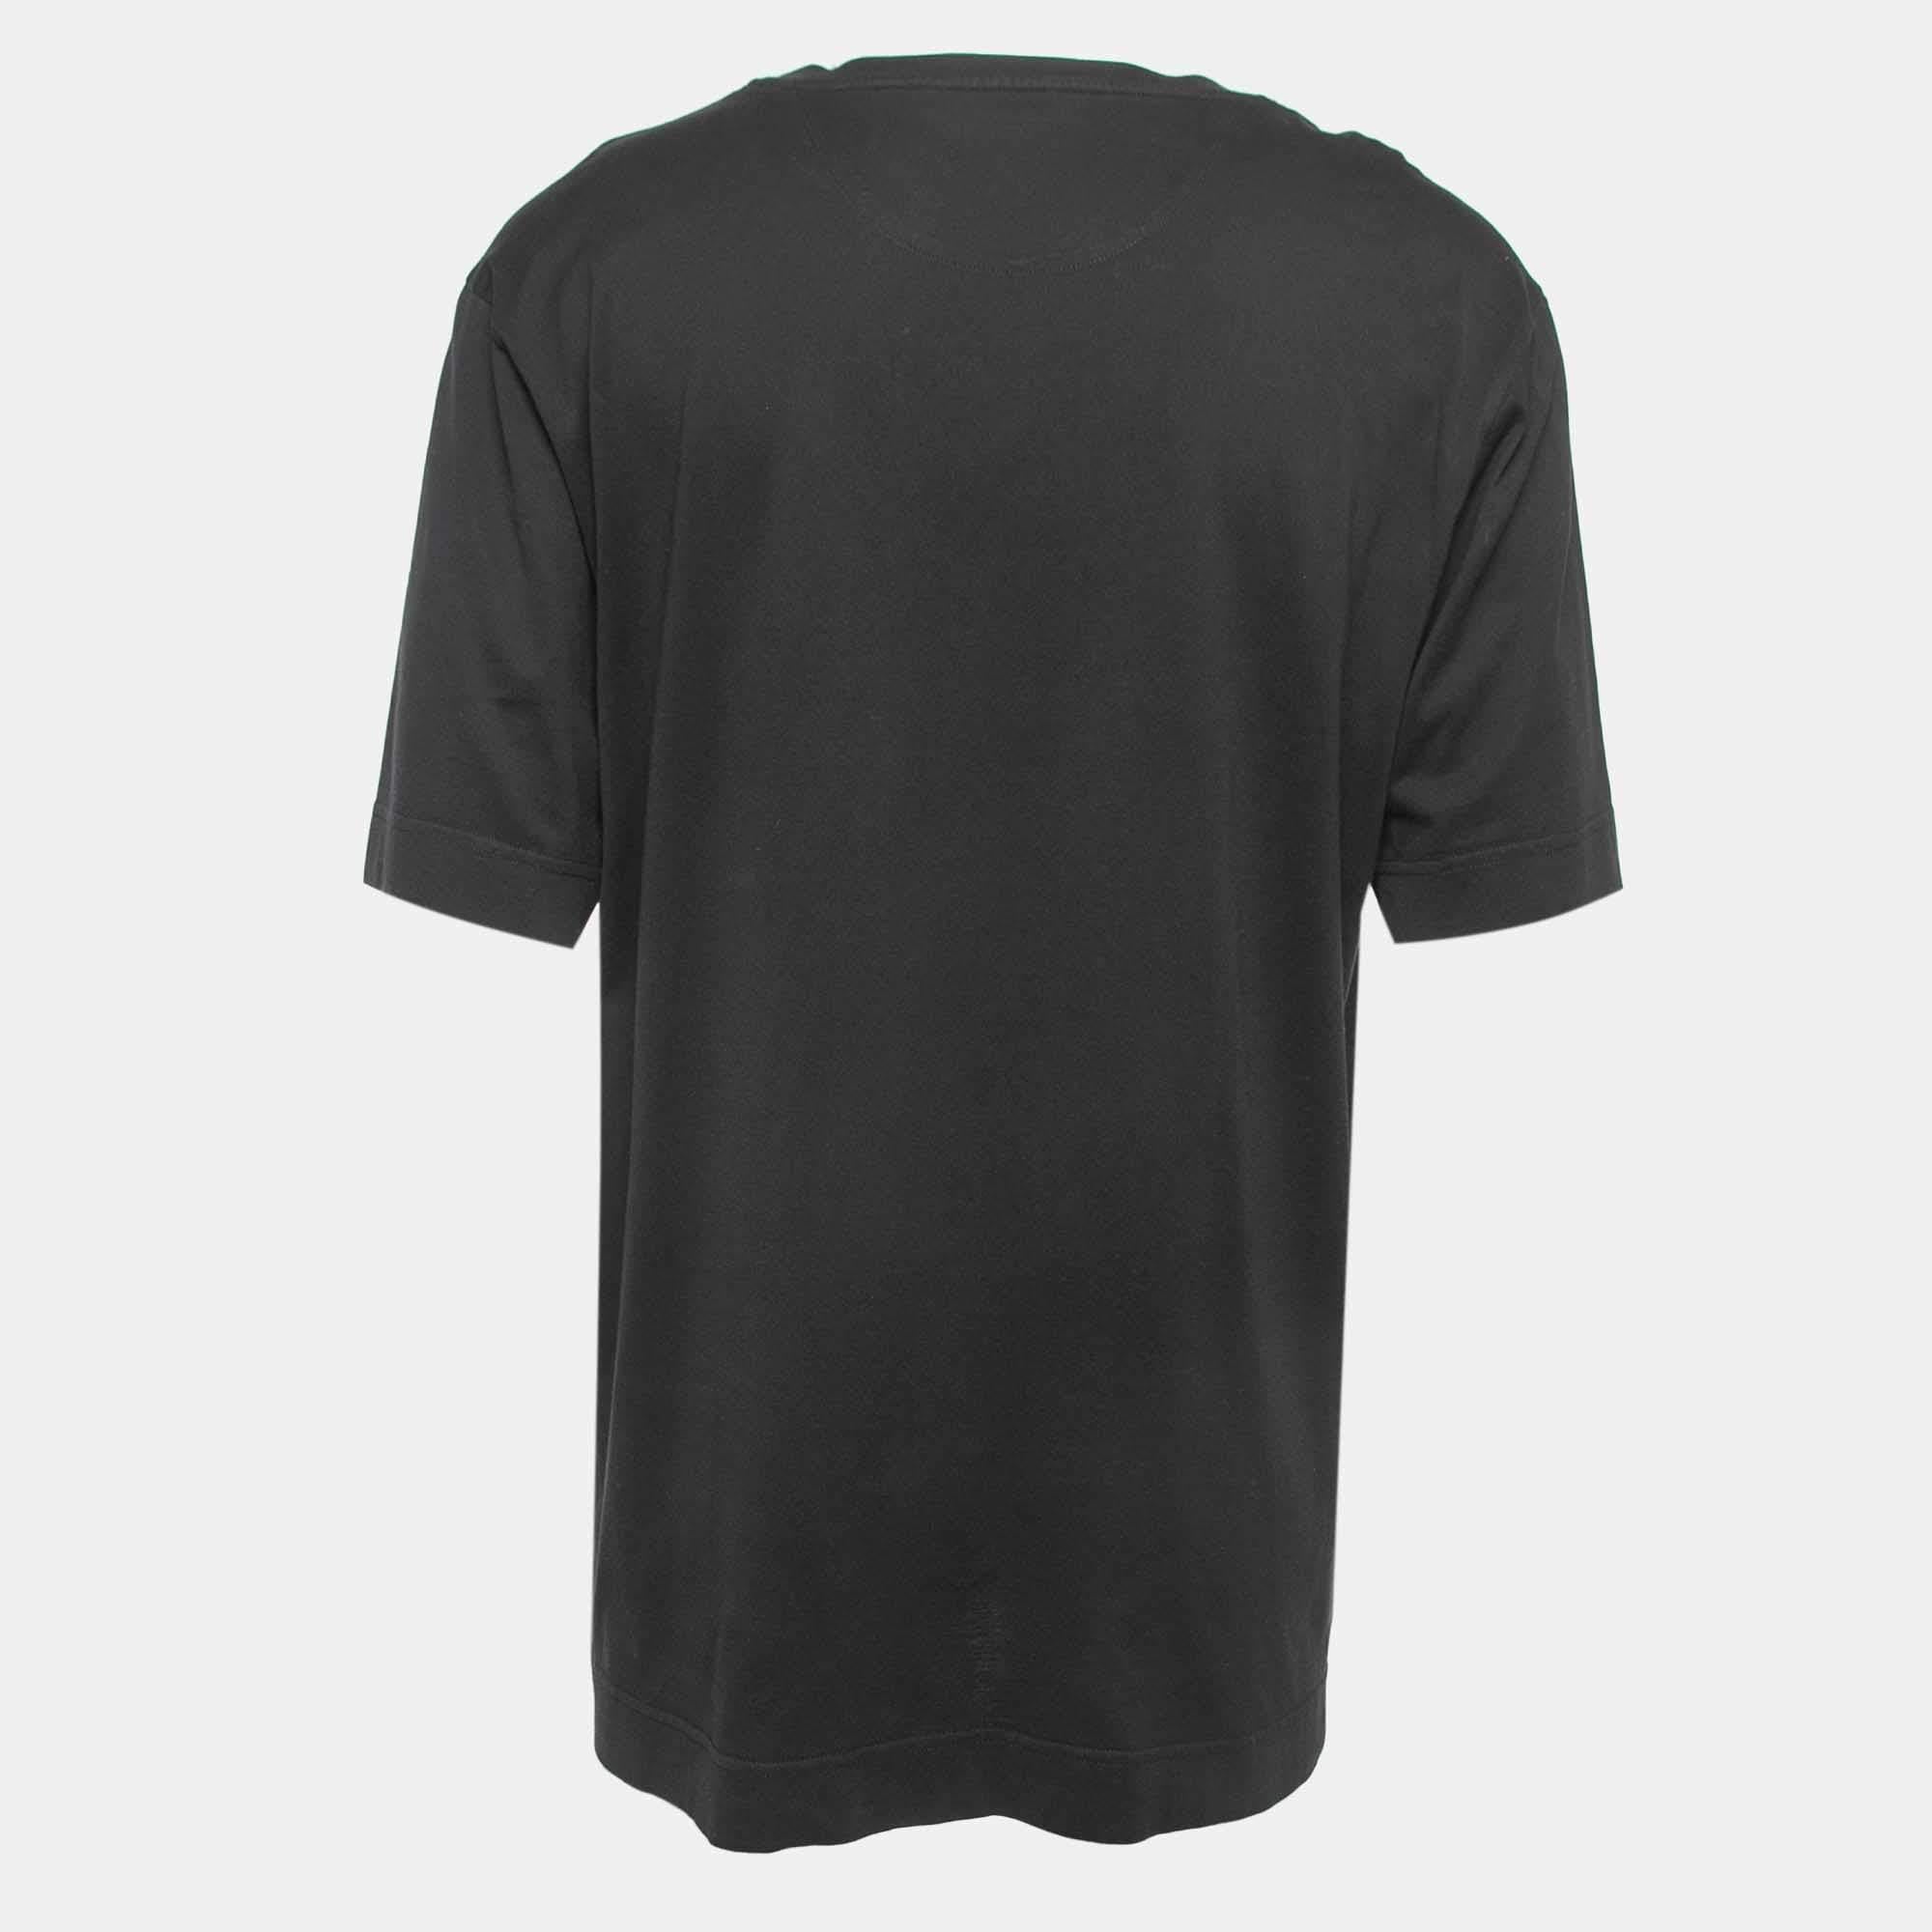 Get the style you desire as well as the comfort you need with this short-sleeve T-shirt from Fendi. Made from cotton, the black T-shirt is enhanced with a front logo.

